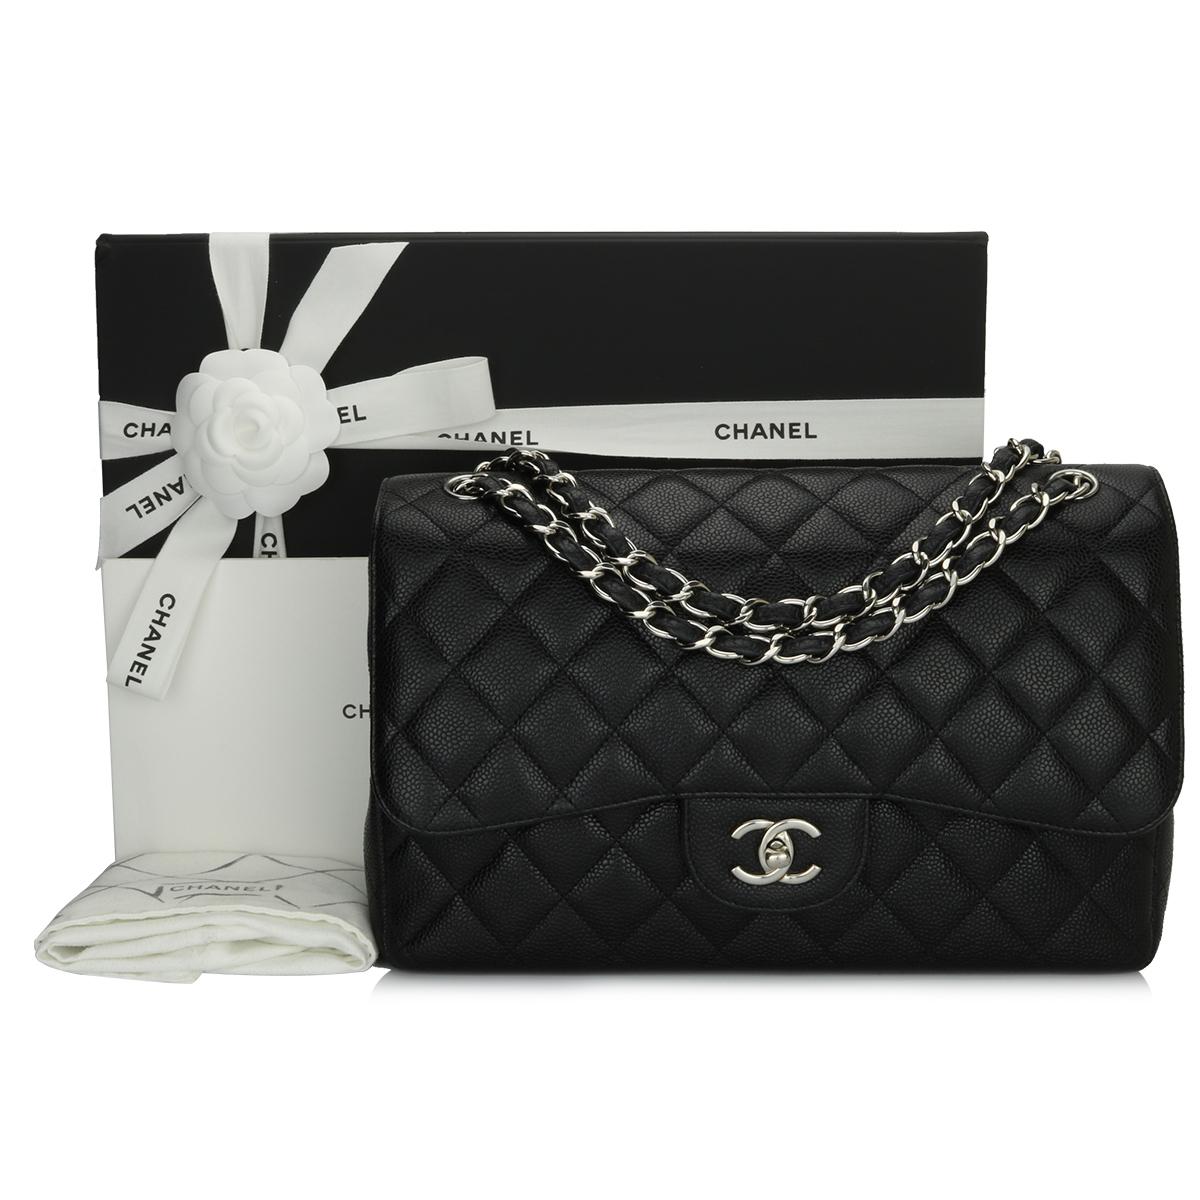 Authentic CHANEL Classic Jumbo Double Flap Bag Black Caviar with Silver Hardware 2013.

This stunning bag is in excellent condition, the bag still holds its original shape, and the hardware is still very shiny.

Exterior Condition: Excellent